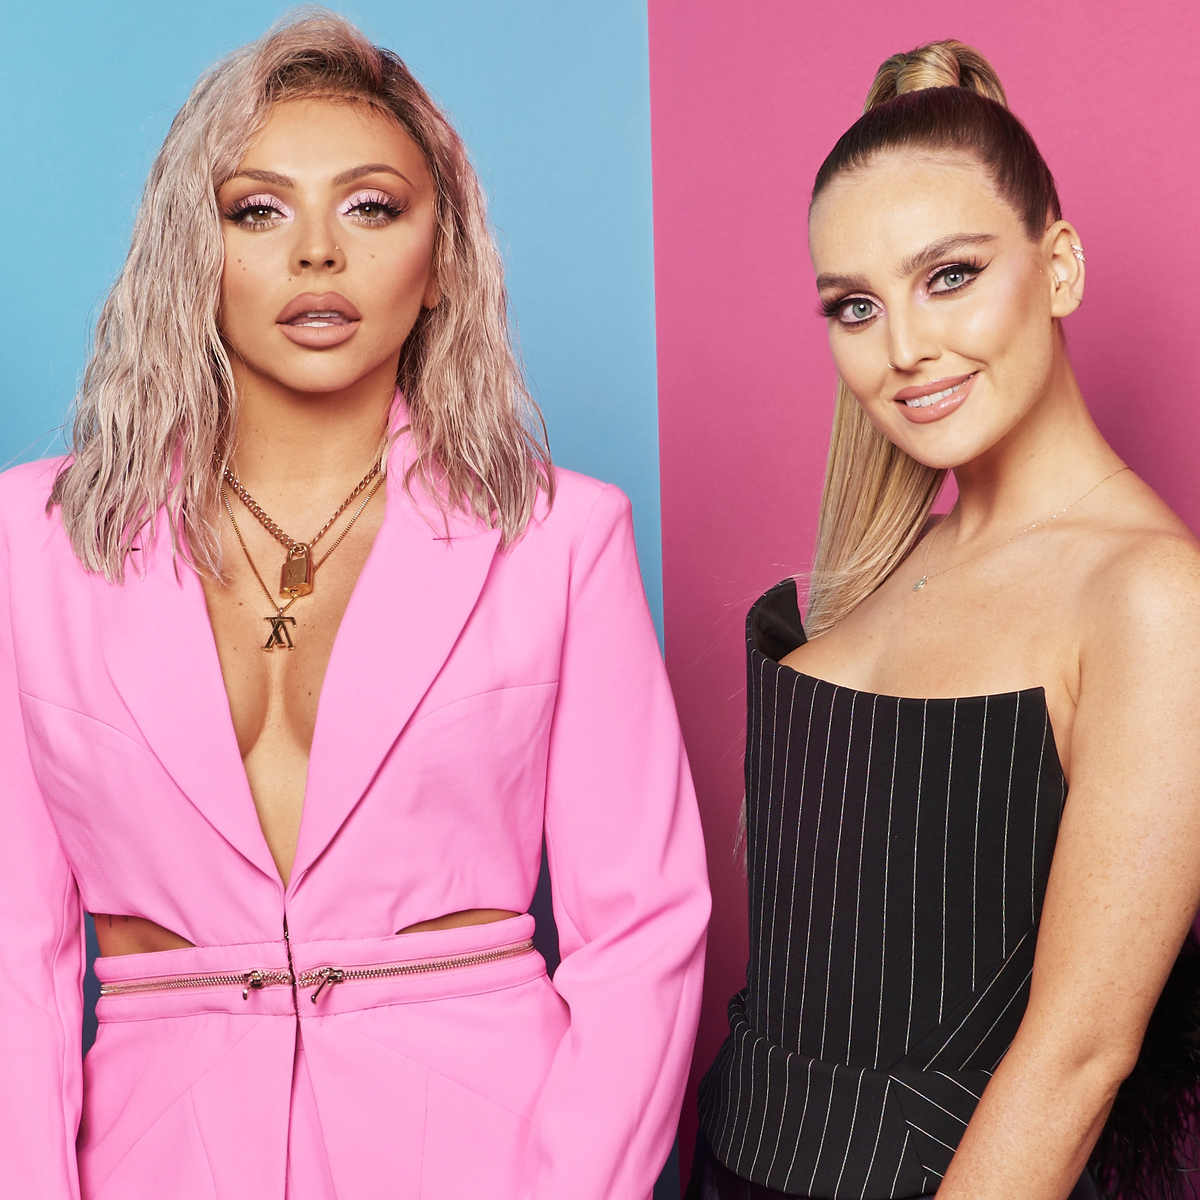 Little Mix’s Perrie Edwards Says She & Jesy Nelson Don’t Speak Anymore